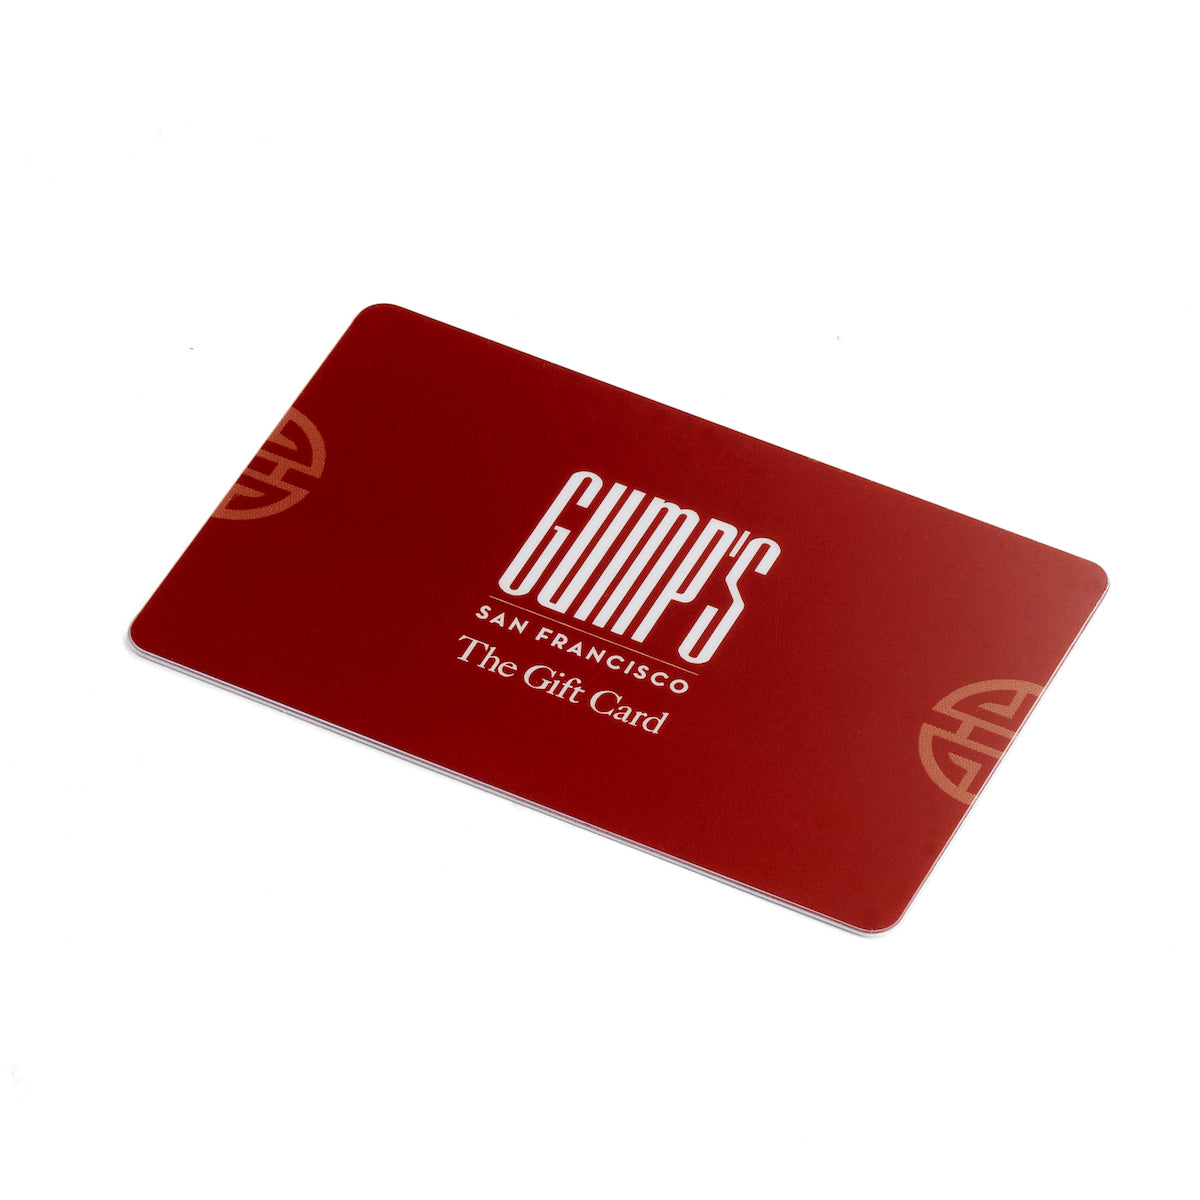 The Gump's Gift Card $500